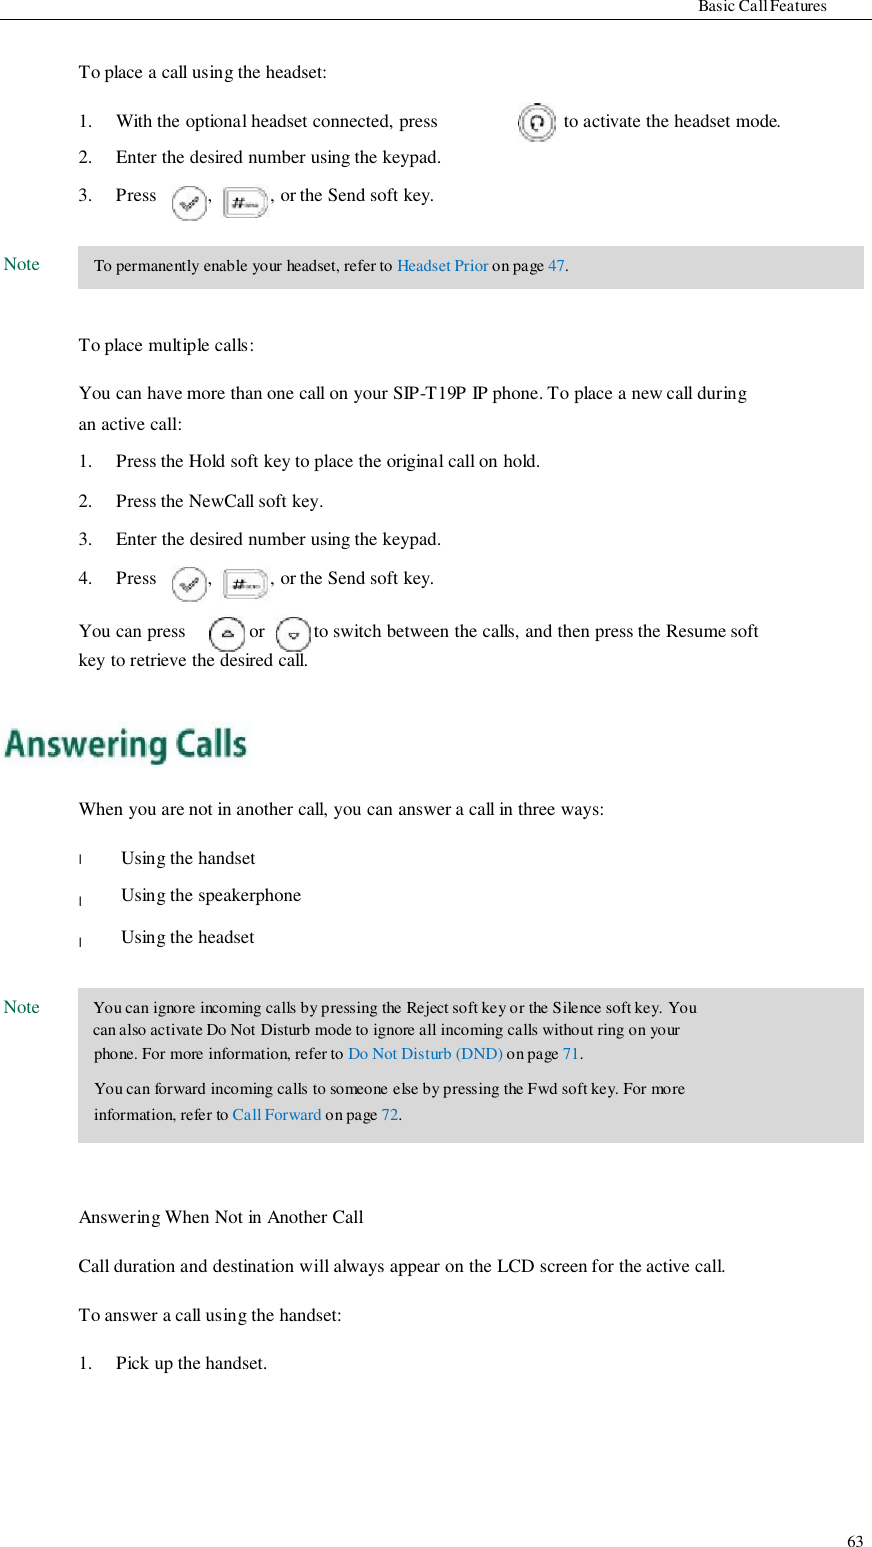                     Basic Call Features   To place a call using the headset:  1. 2.  With the optional headset connected, press Enter the desired number using the keypad.  to activate the headset mode. 3.  Press  ,  , or the Send soft key.  Note   To permanently enable your headset, refer to Headset Prior on page 47.   To place multiple calls:  You can have more than one call on your SIP-T19P IP phone. To place a new call during an active call: 1. 2. 3. Press the Hold soft key to place the original call on hold. Press the NewCall soft key. Enter the desired number using the keypad. 4.  Press  ,  , or the Send soft key.  You can press  or  to switch between the calls, and then press the Resume soft key to retrieve the desired call.      When you are not in another call, you can answer a call in three ways:         Note  l  l  l  Using the handset Using the speakerphone Using the headset   You can ignore incoming calls by pressing the Reject soft key or the Silence soft key. You can also activate Do Not Disturb mode to ignore all incoming calls without ring on your phone. For more information, refer to Do Not Disturb (DND) on page 71. You can forward incoming calls to someone else by pressing the Fwd soft key. For more information, refer to Call Forward on page 72.    Answering When Not in Another Call  Call duration and destination will always appear on the LCD screen for the active call.  To answer a call using the handset:  1.   Pick up the handset.          63